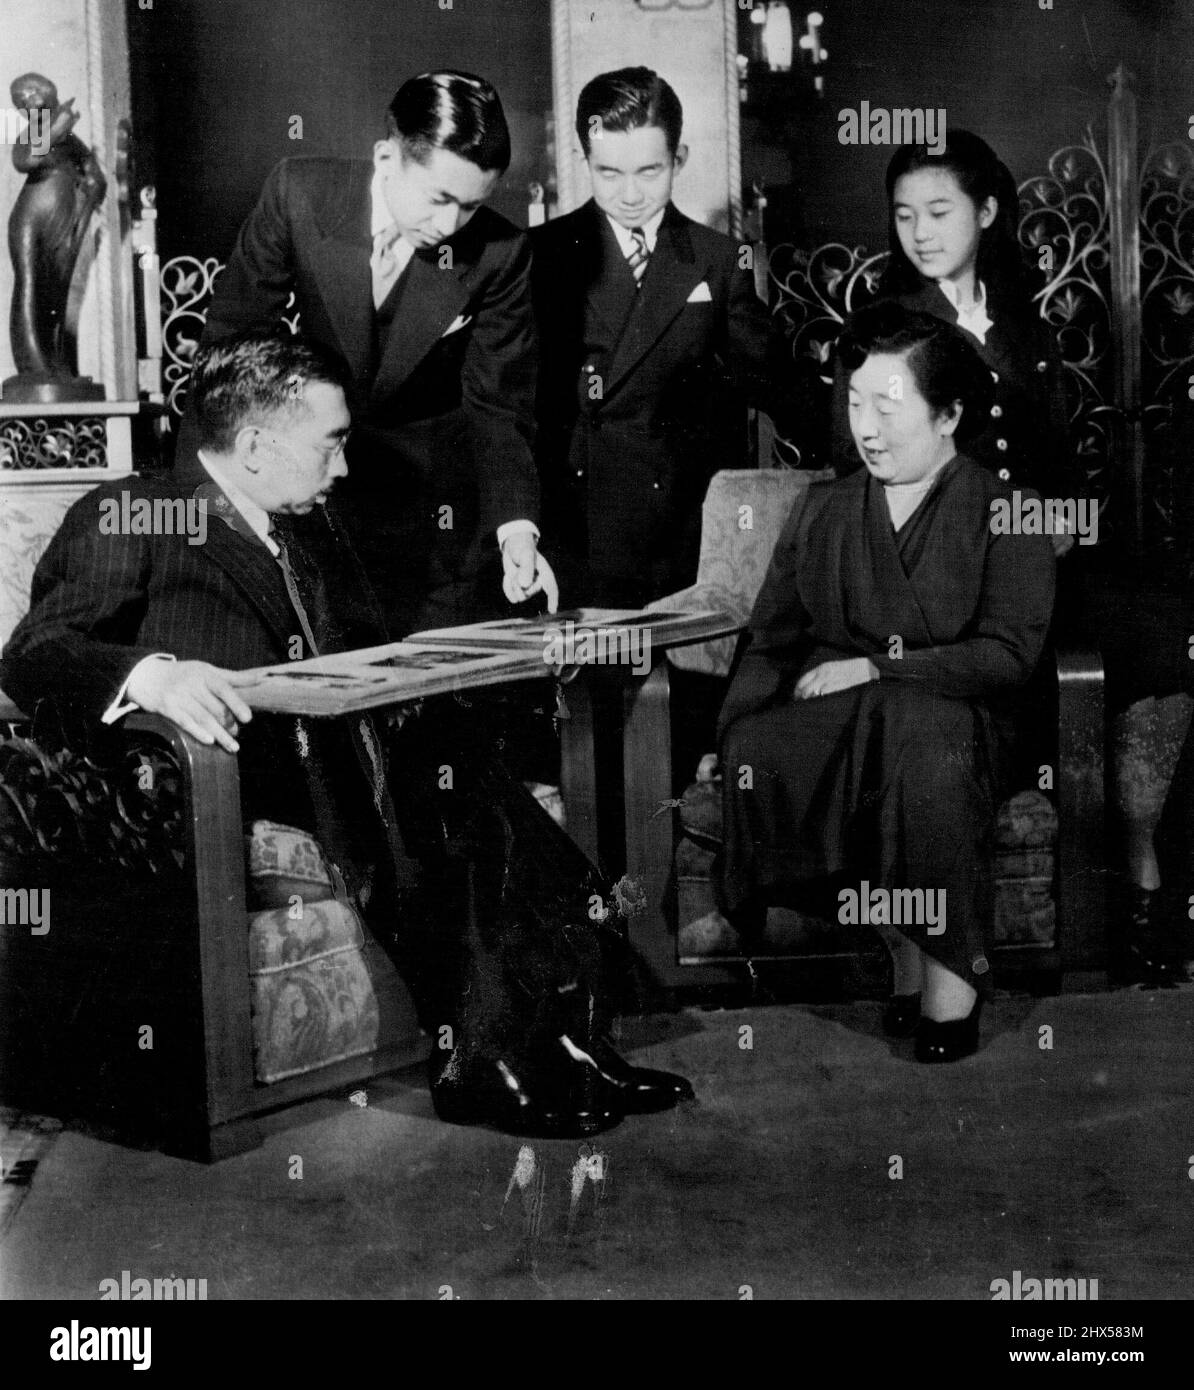 Japan's Imperial Family -- Japanese Emperor Hirohito and members of his family look through a photo album at the Imperial palace in Tokyo in this picture released this week by the Imperial household. Left to right: the emperor; his sons, Crown Prince Akihito and Prince Masahito; Empress Nagako, and daughter Princess Takako. December 27, 1952. (Photo by AP Wirephoto). Stock Photo